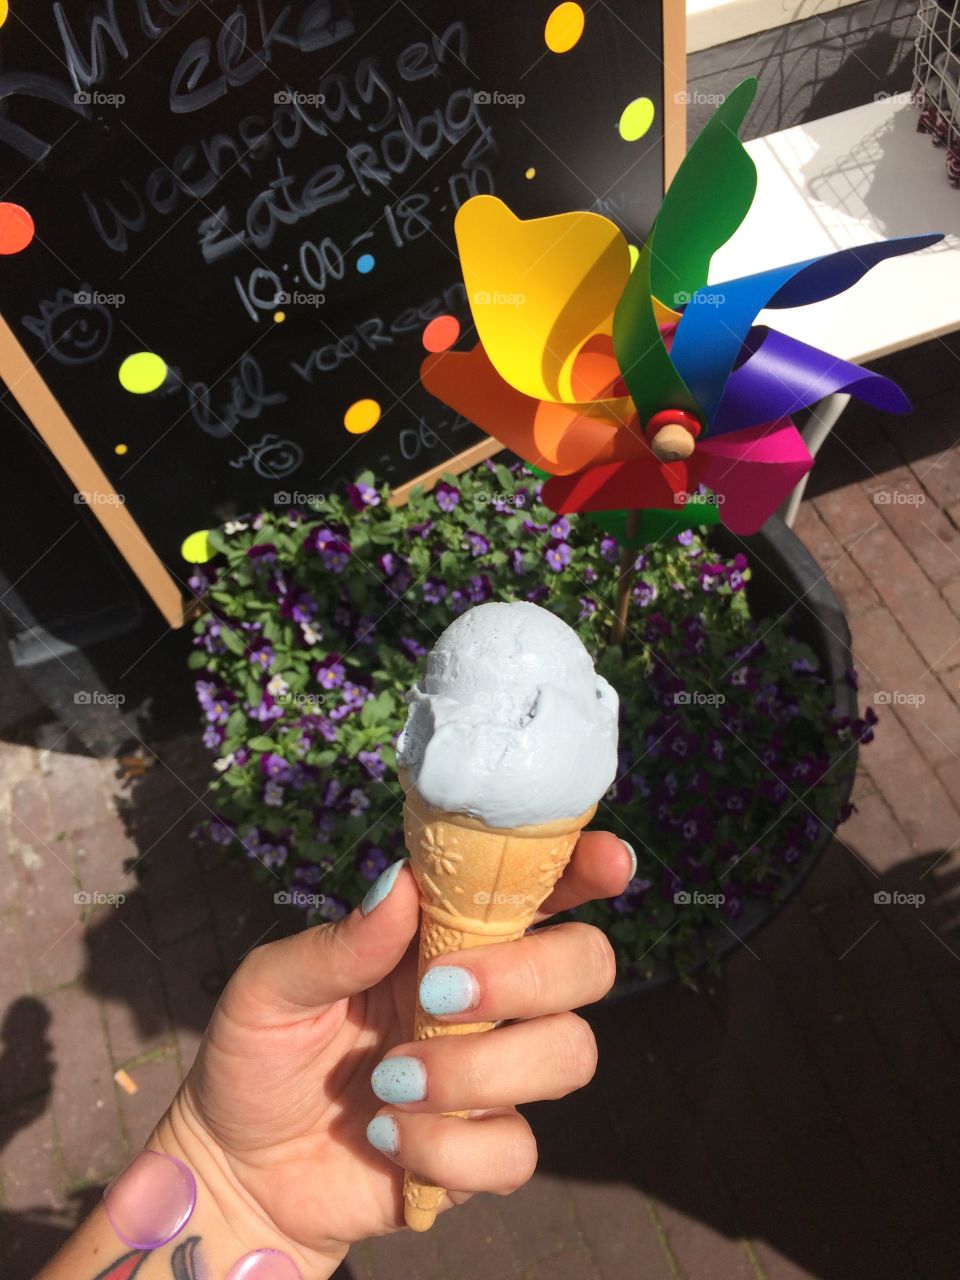 Small blue ice cream in front of plants and pinwheels. 